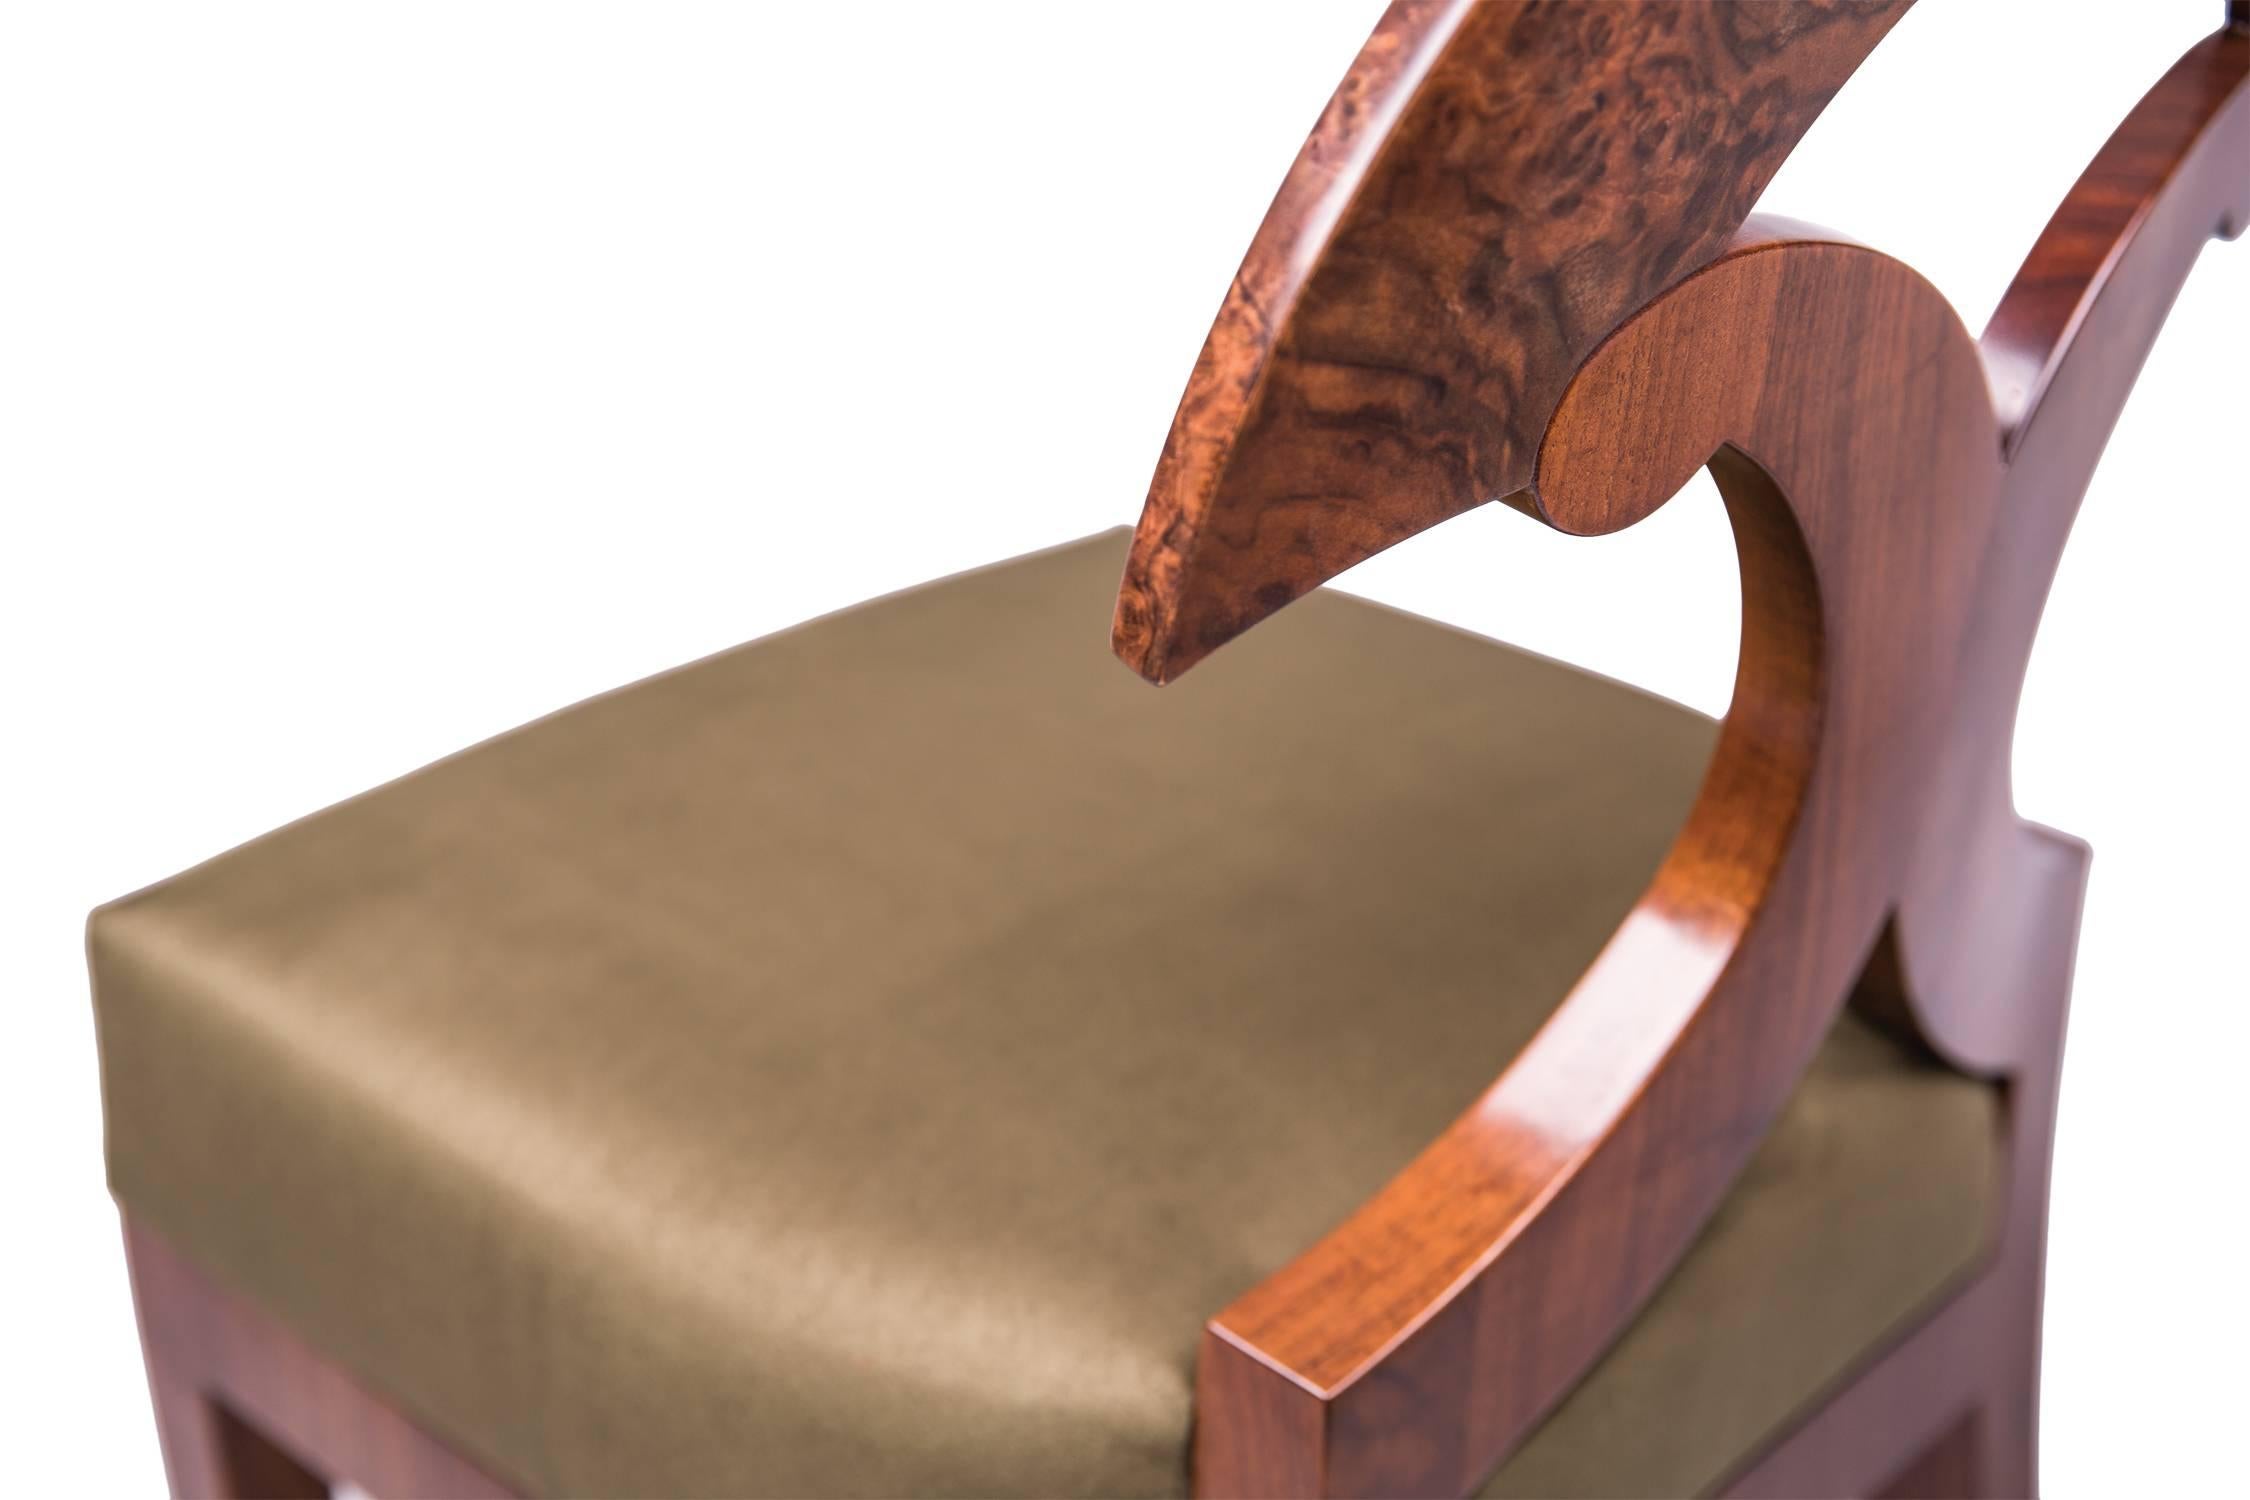 Burl Yoke back side chair with tapered front legs, lavishly curved back legs (curved in three dimensions), with glue-laminated veneered backrest (burl wood), back curved to fit the body, upholstered with a three-layer padding material on zig-zag